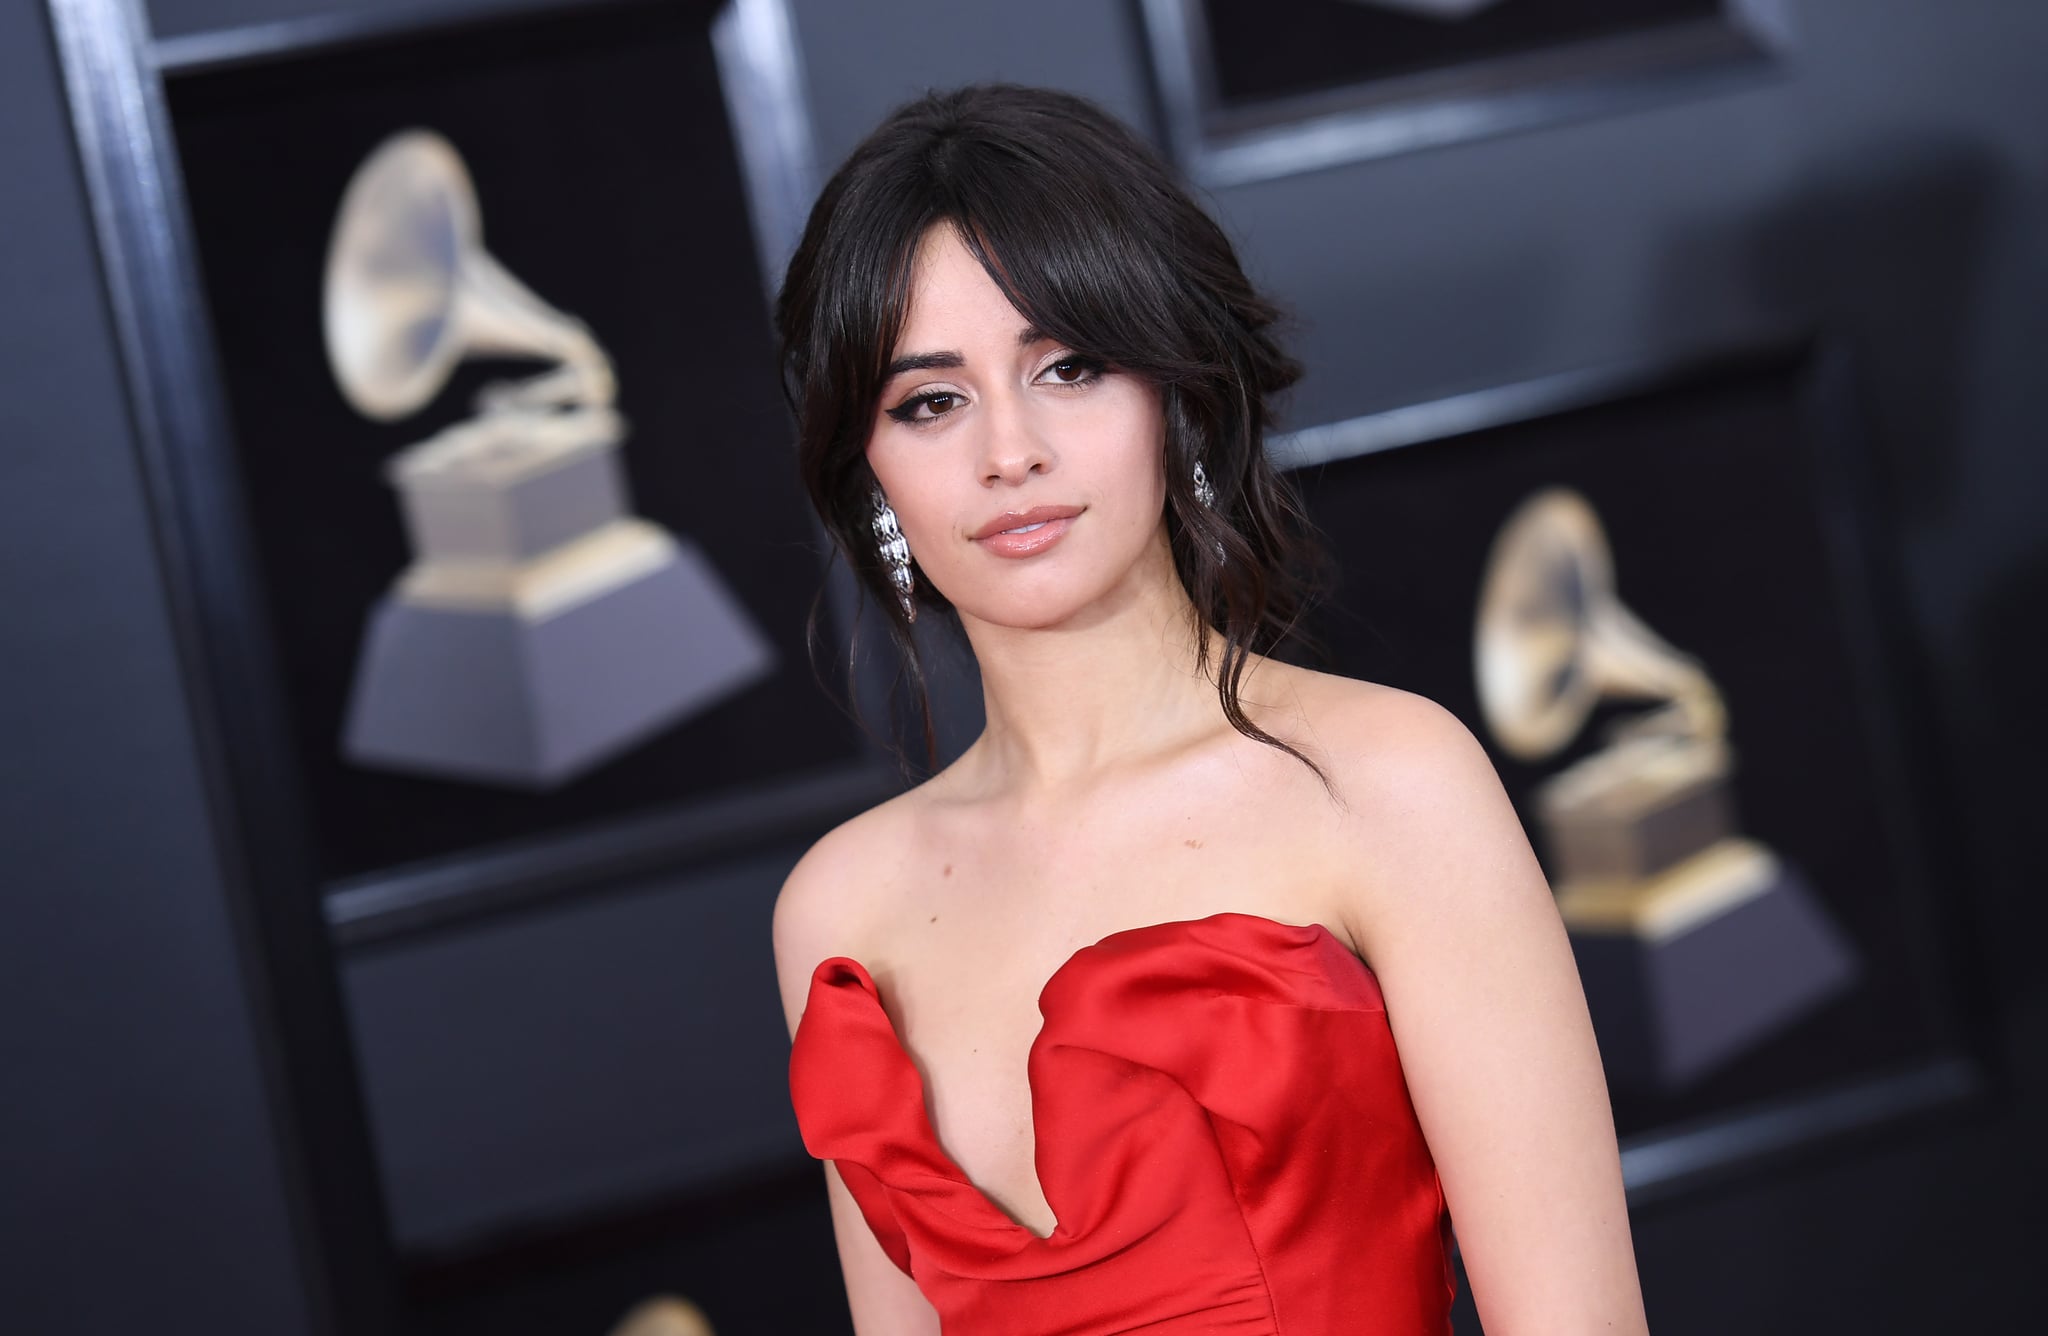 Camila Cabello arrives for the 60th Grammy Awards on January 28, 2018, in New York.  / AFP PHOTO / ANGELA WEISS        (Photo credit should read ANGELA WEISS/AFP/Getty Images)